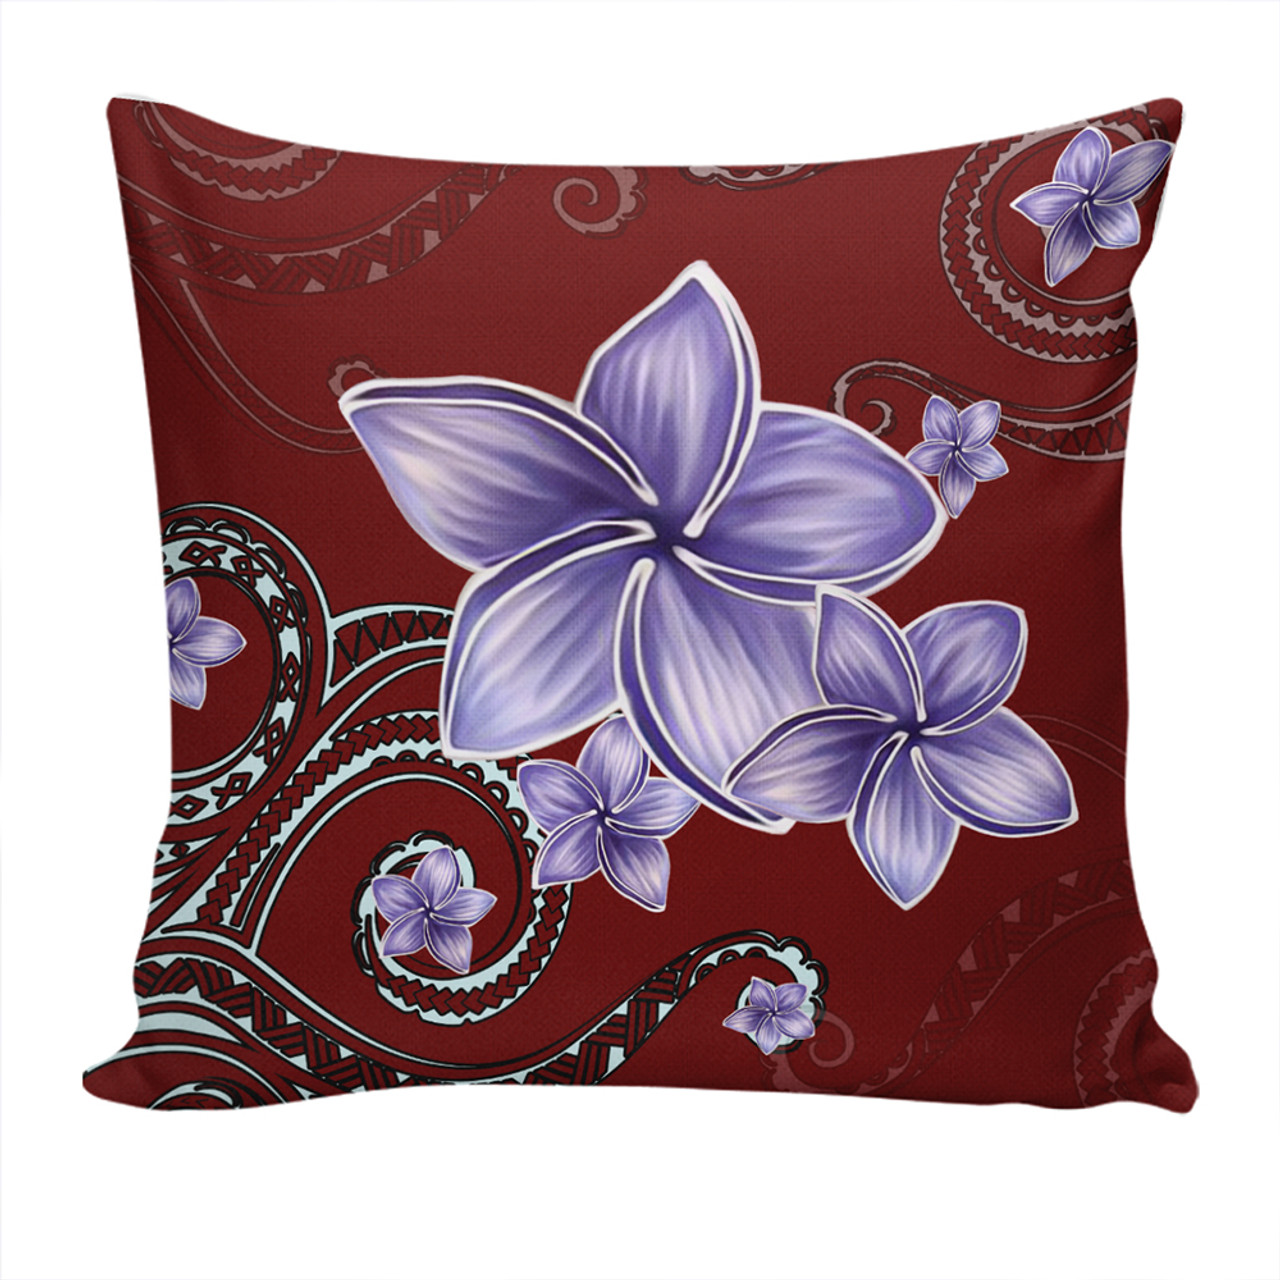 Hawaii Pillow Cover Plumeria Violet Polynesia Red